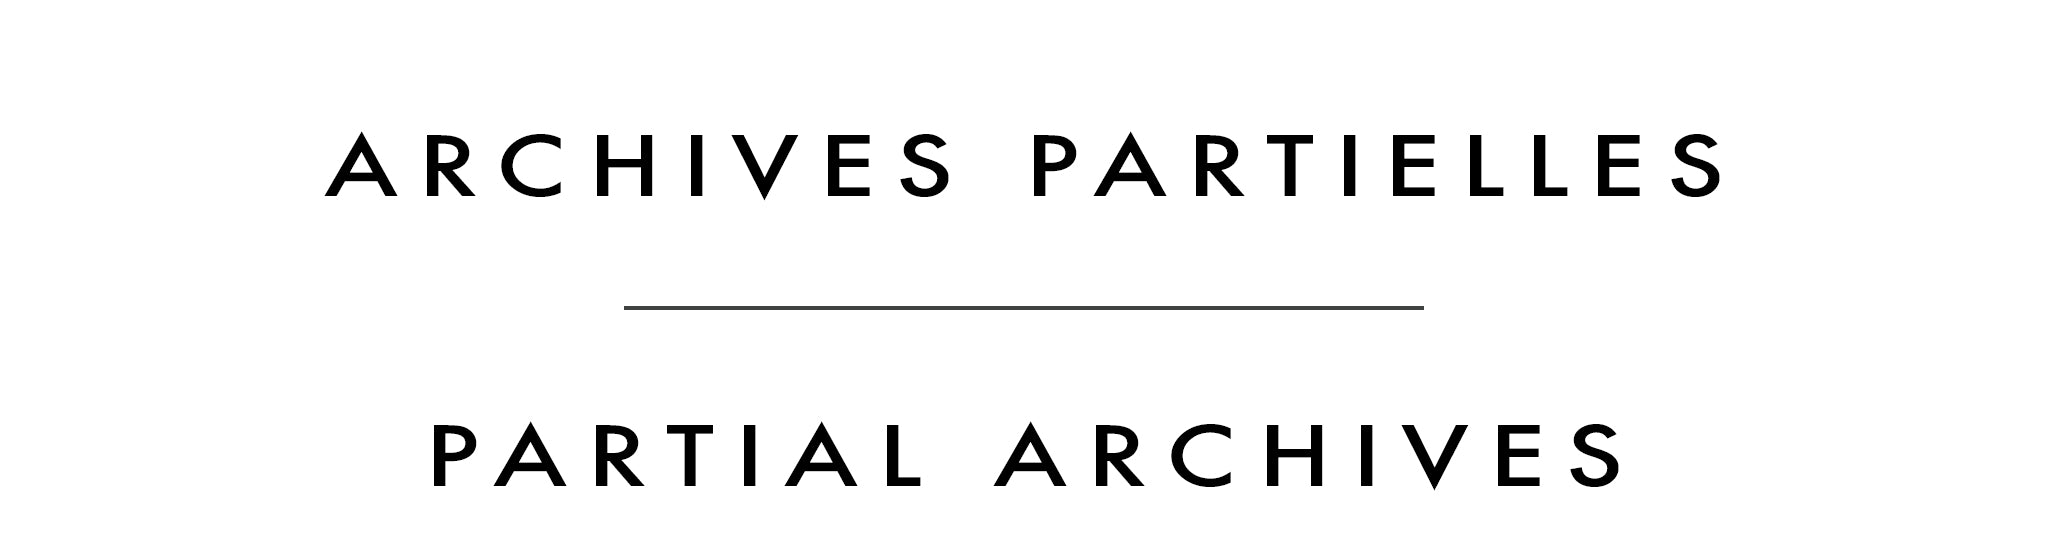 Archives partielles | Partial Archives | Rod Charlesworth